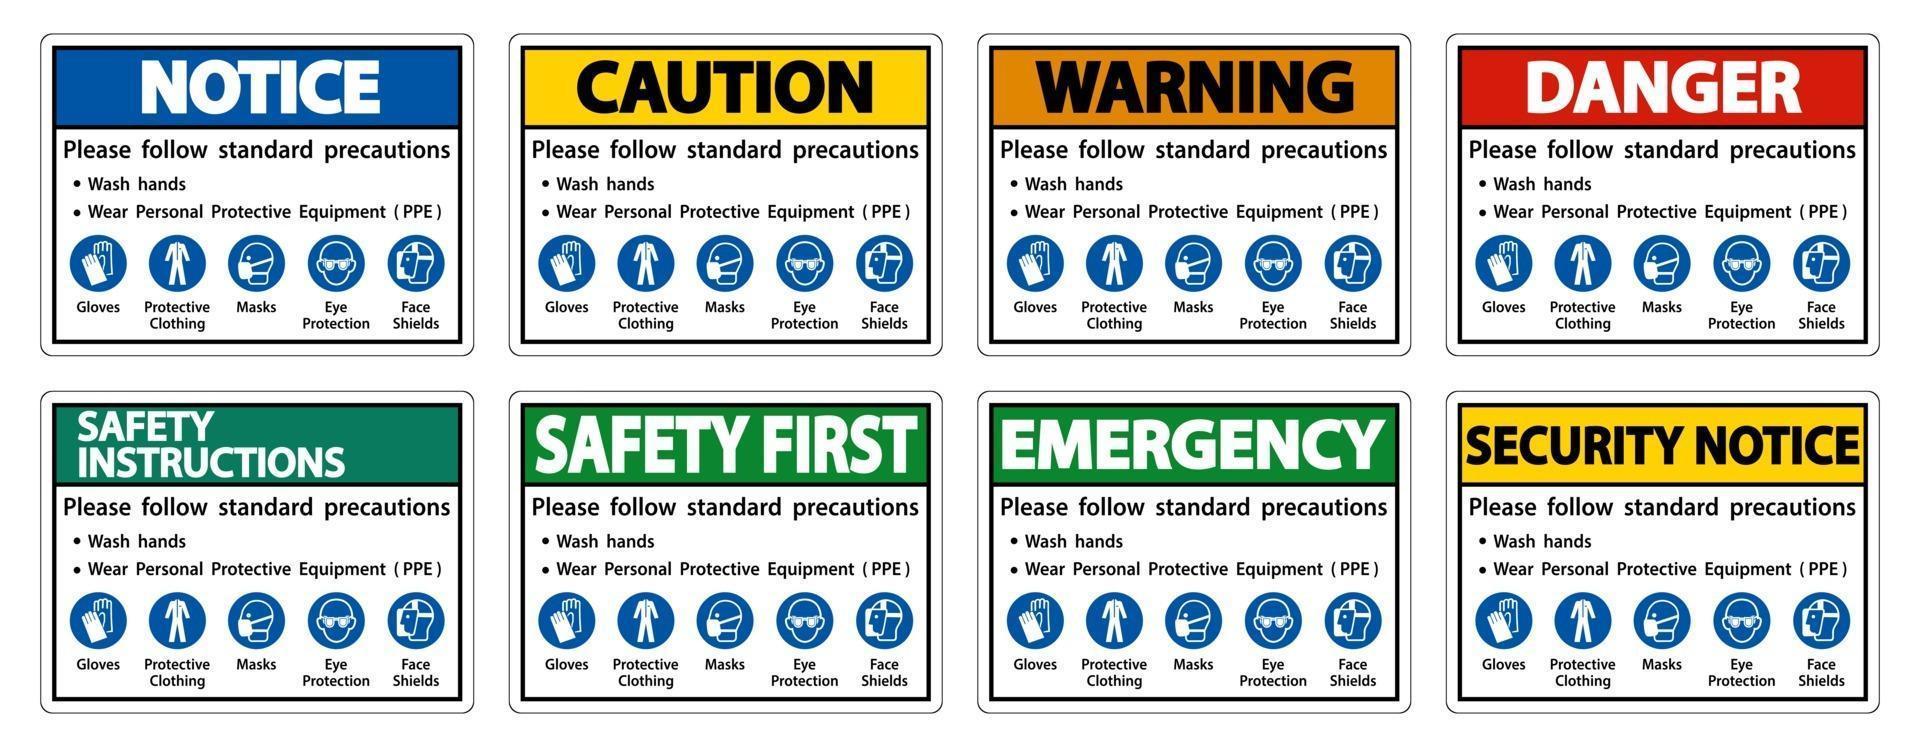 Please follow standard precautions ,Wash hands,Wear Personal Protective Equipment PPE,Gloves Protective Clothing Masks Eye Protection Face Shield vector